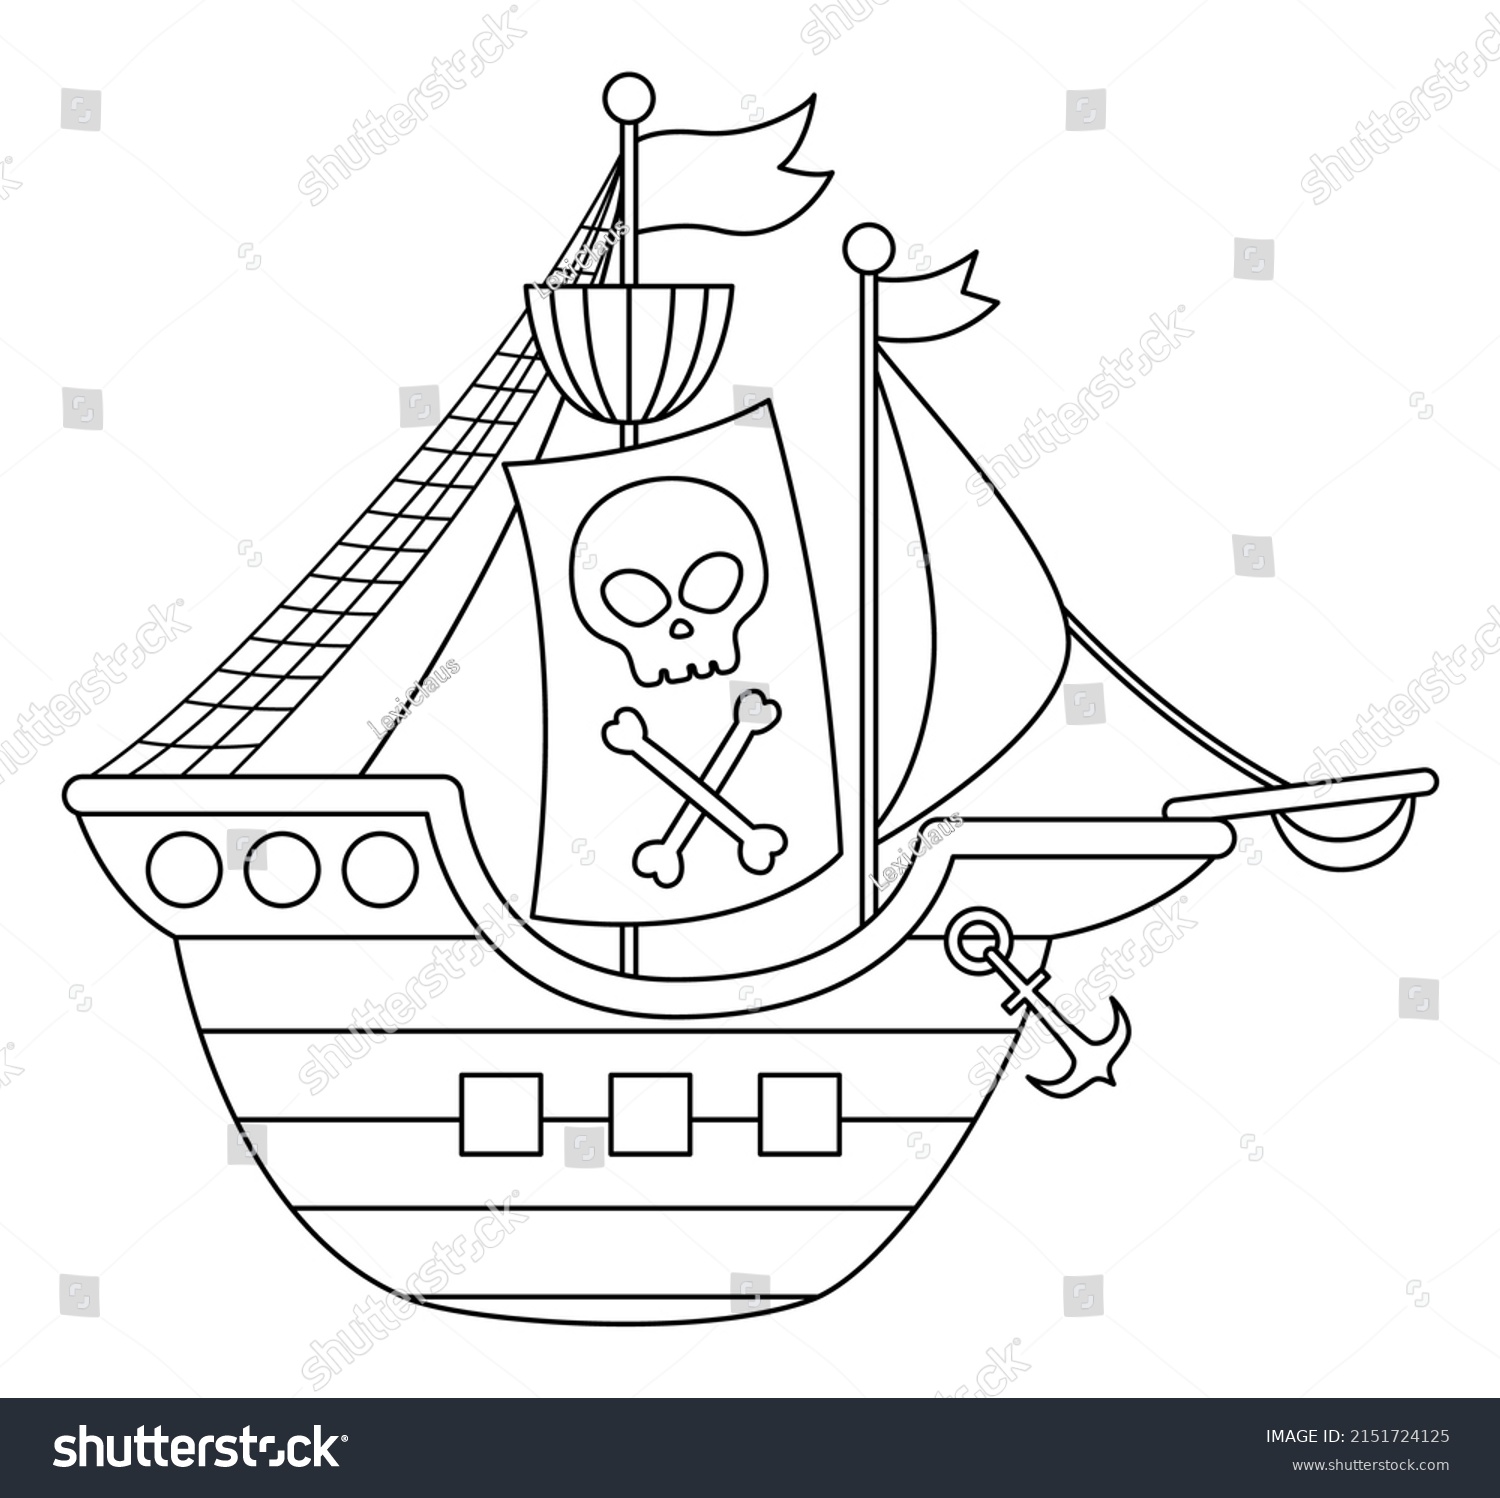 17,341 Sailing funny Images, Stock Photos & Vectors | Shutterstock